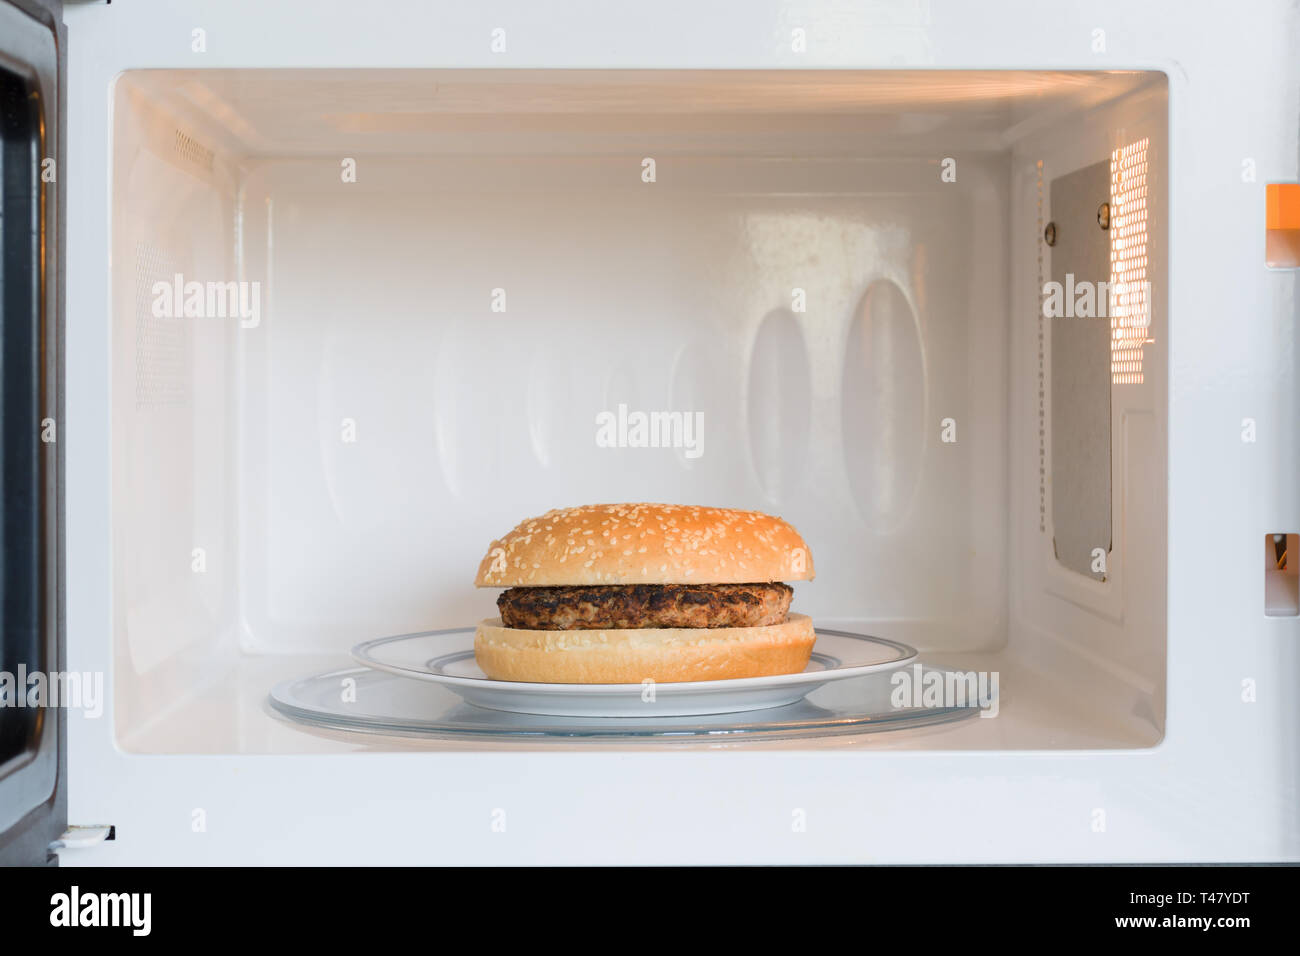 Unappealing microwavable hamburger on a plate in a microwave oven Stock Photo